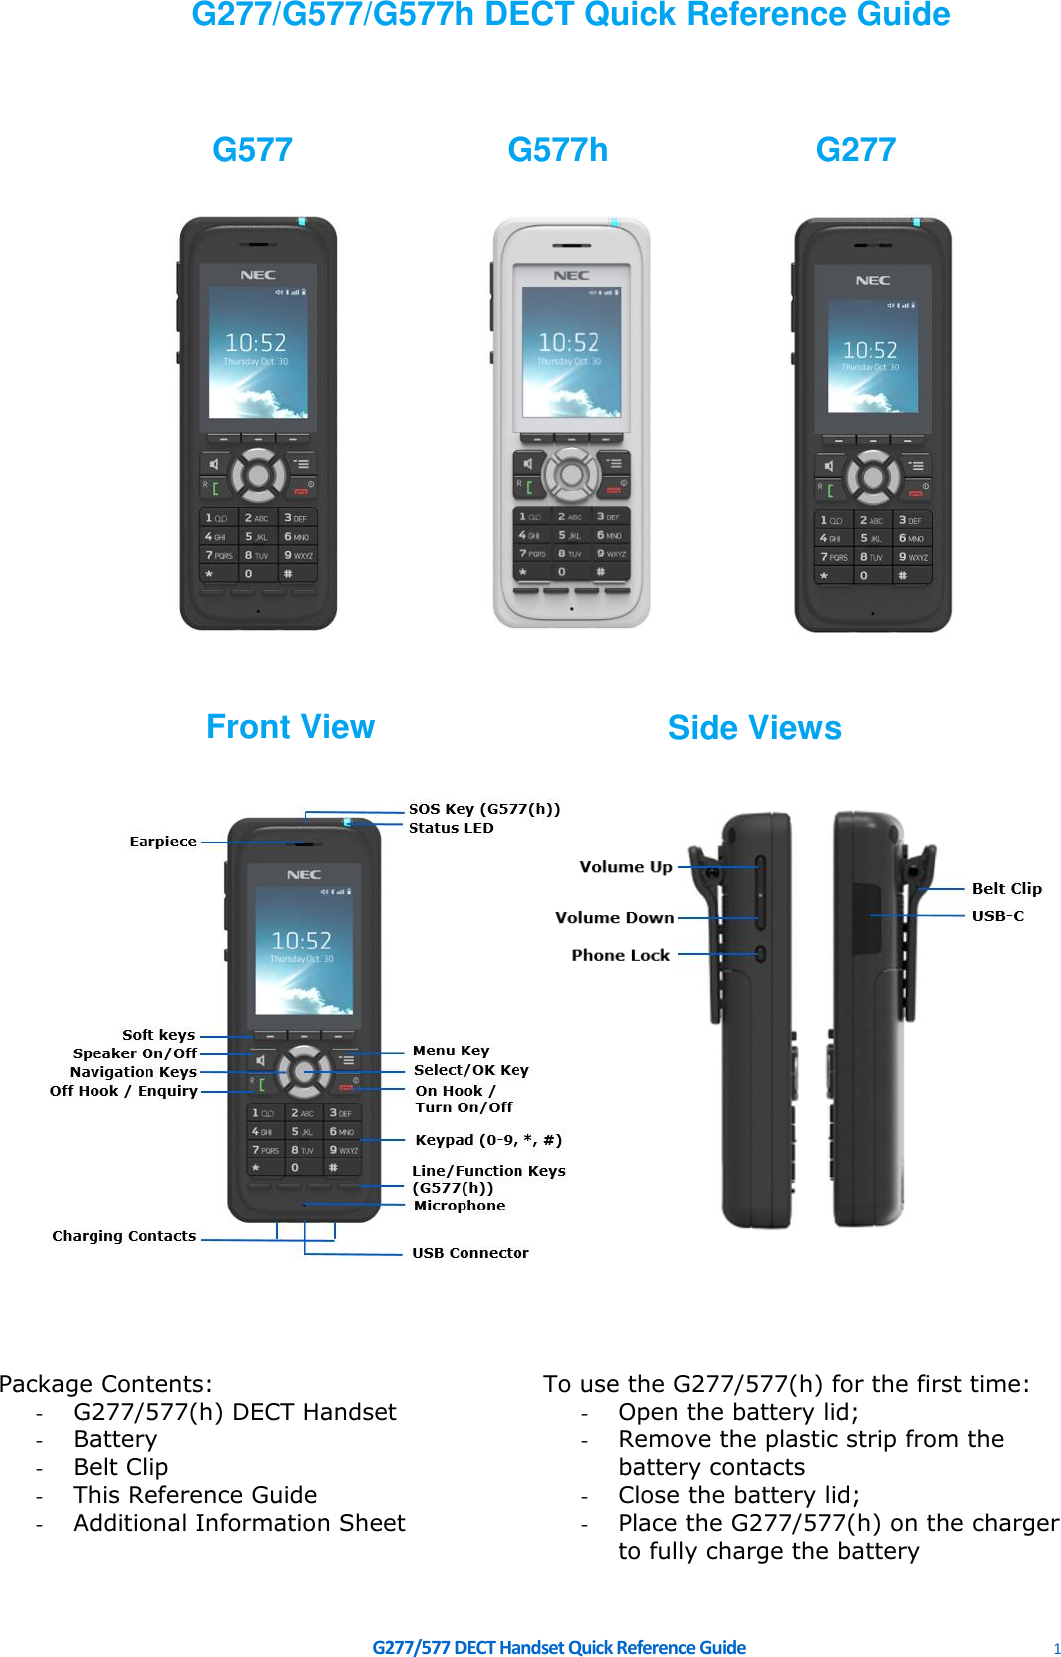     G277/577 DECT Handset Quick Reference Guide    1  Package Contents: - G277/577(h) DECT Handset - Battery - Belt Clip - This Reference Guide - Additional Information Sheet To use the G277/577(h) for the first time: - Open the battery lid; - Remove the plastic strip from the battery contacts - Close the battery lid; - Place the G277/577(h) on the charger to fully charge the battery        G277/G577/G577h DECT Quick Reference Guide                                      Front View  Side Views G577  G577h  G277 